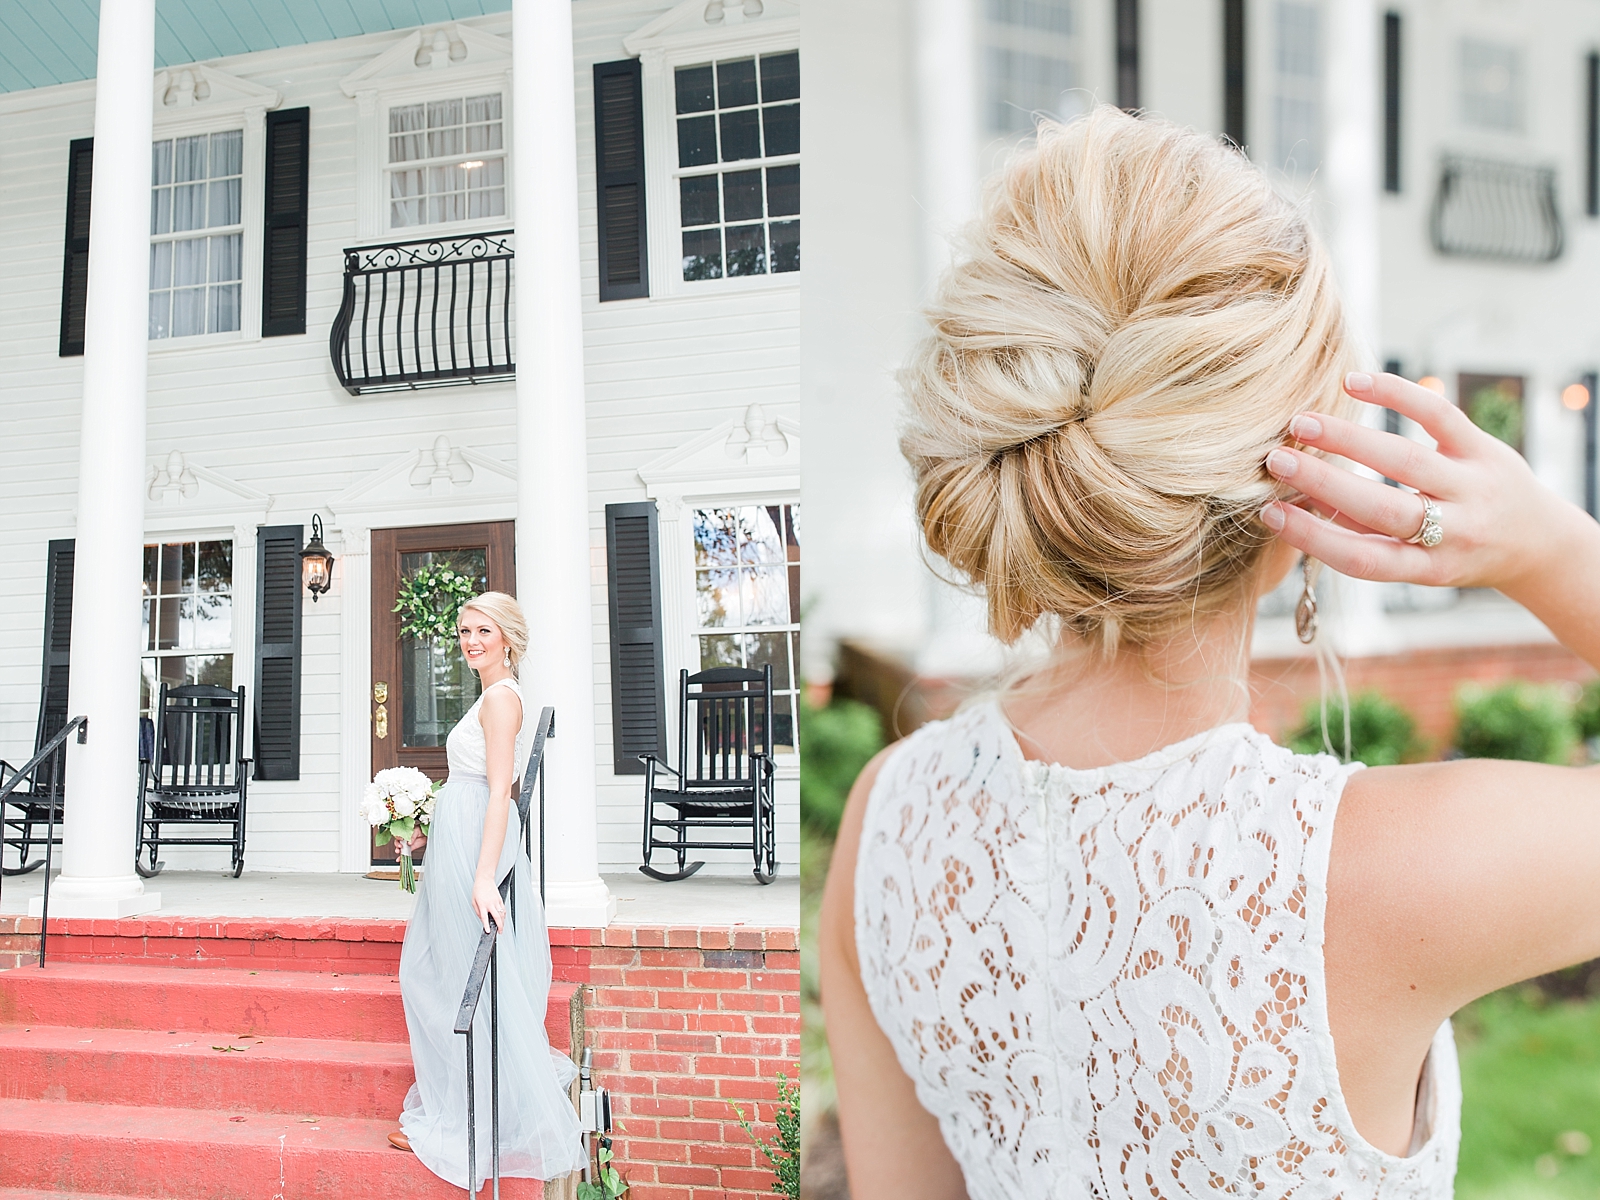 Dahlonega Wedding Venue Bride on steps of The 1888 House and Detail of brides hair Photos